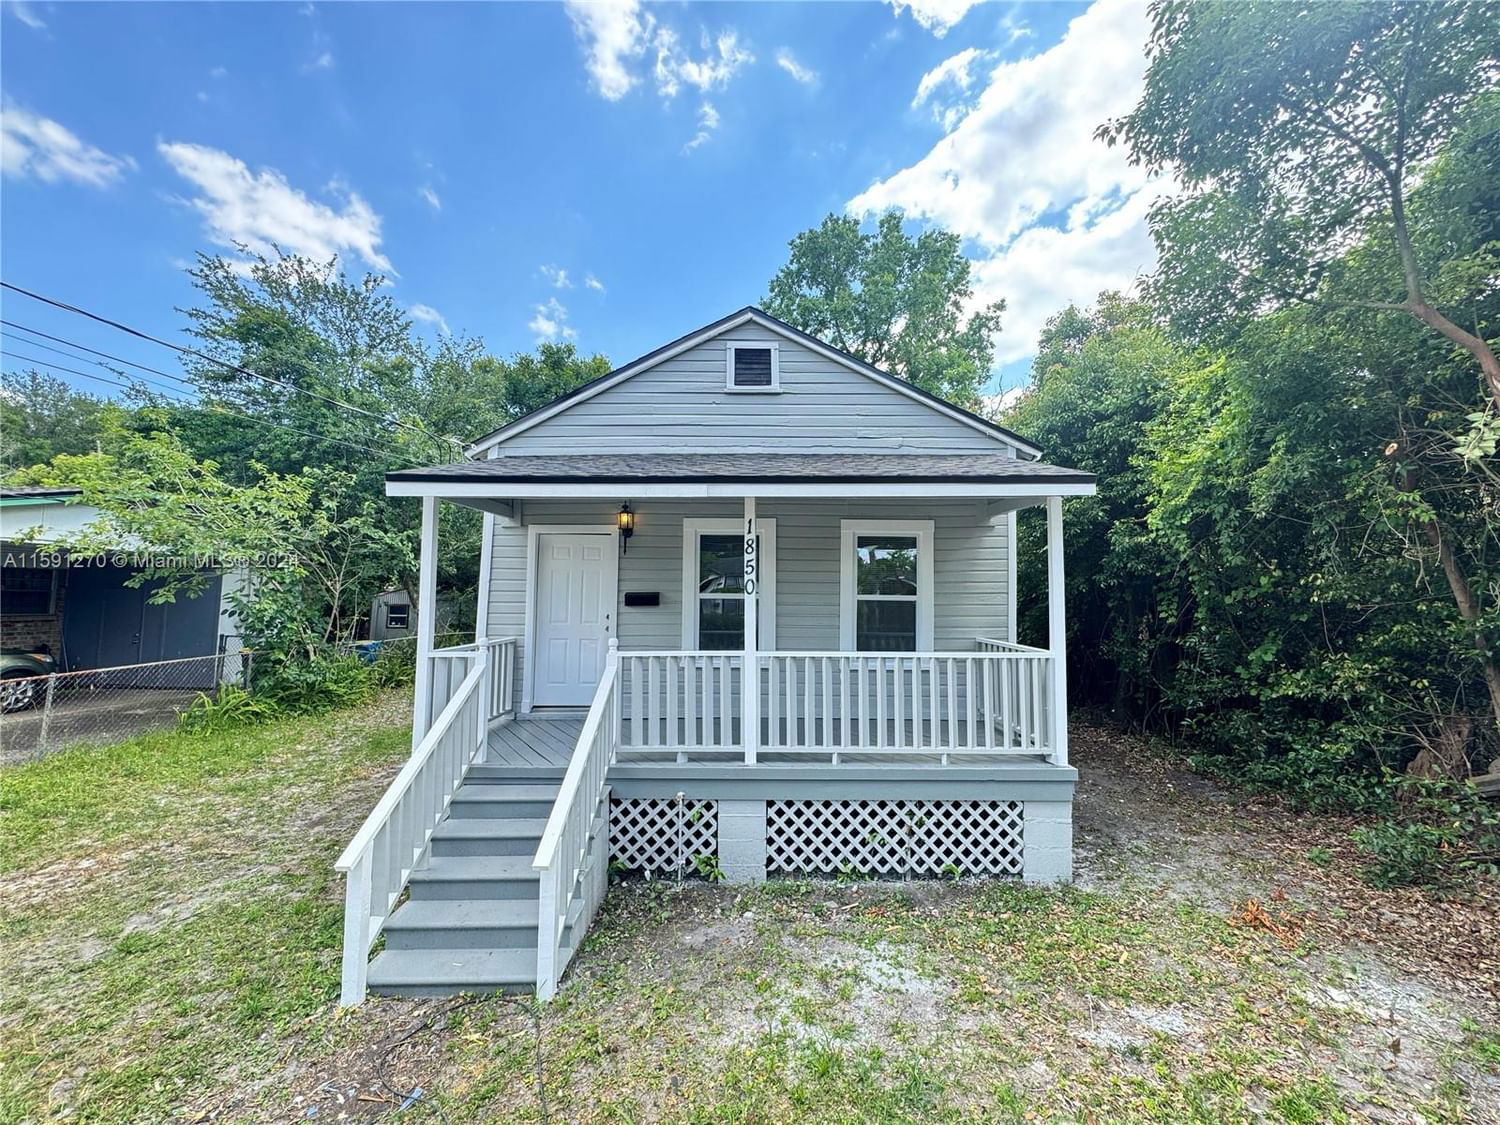 Real estate property located at 1850 23 St, Duval County, MONCRIEF PARK, Jacksonville, FL